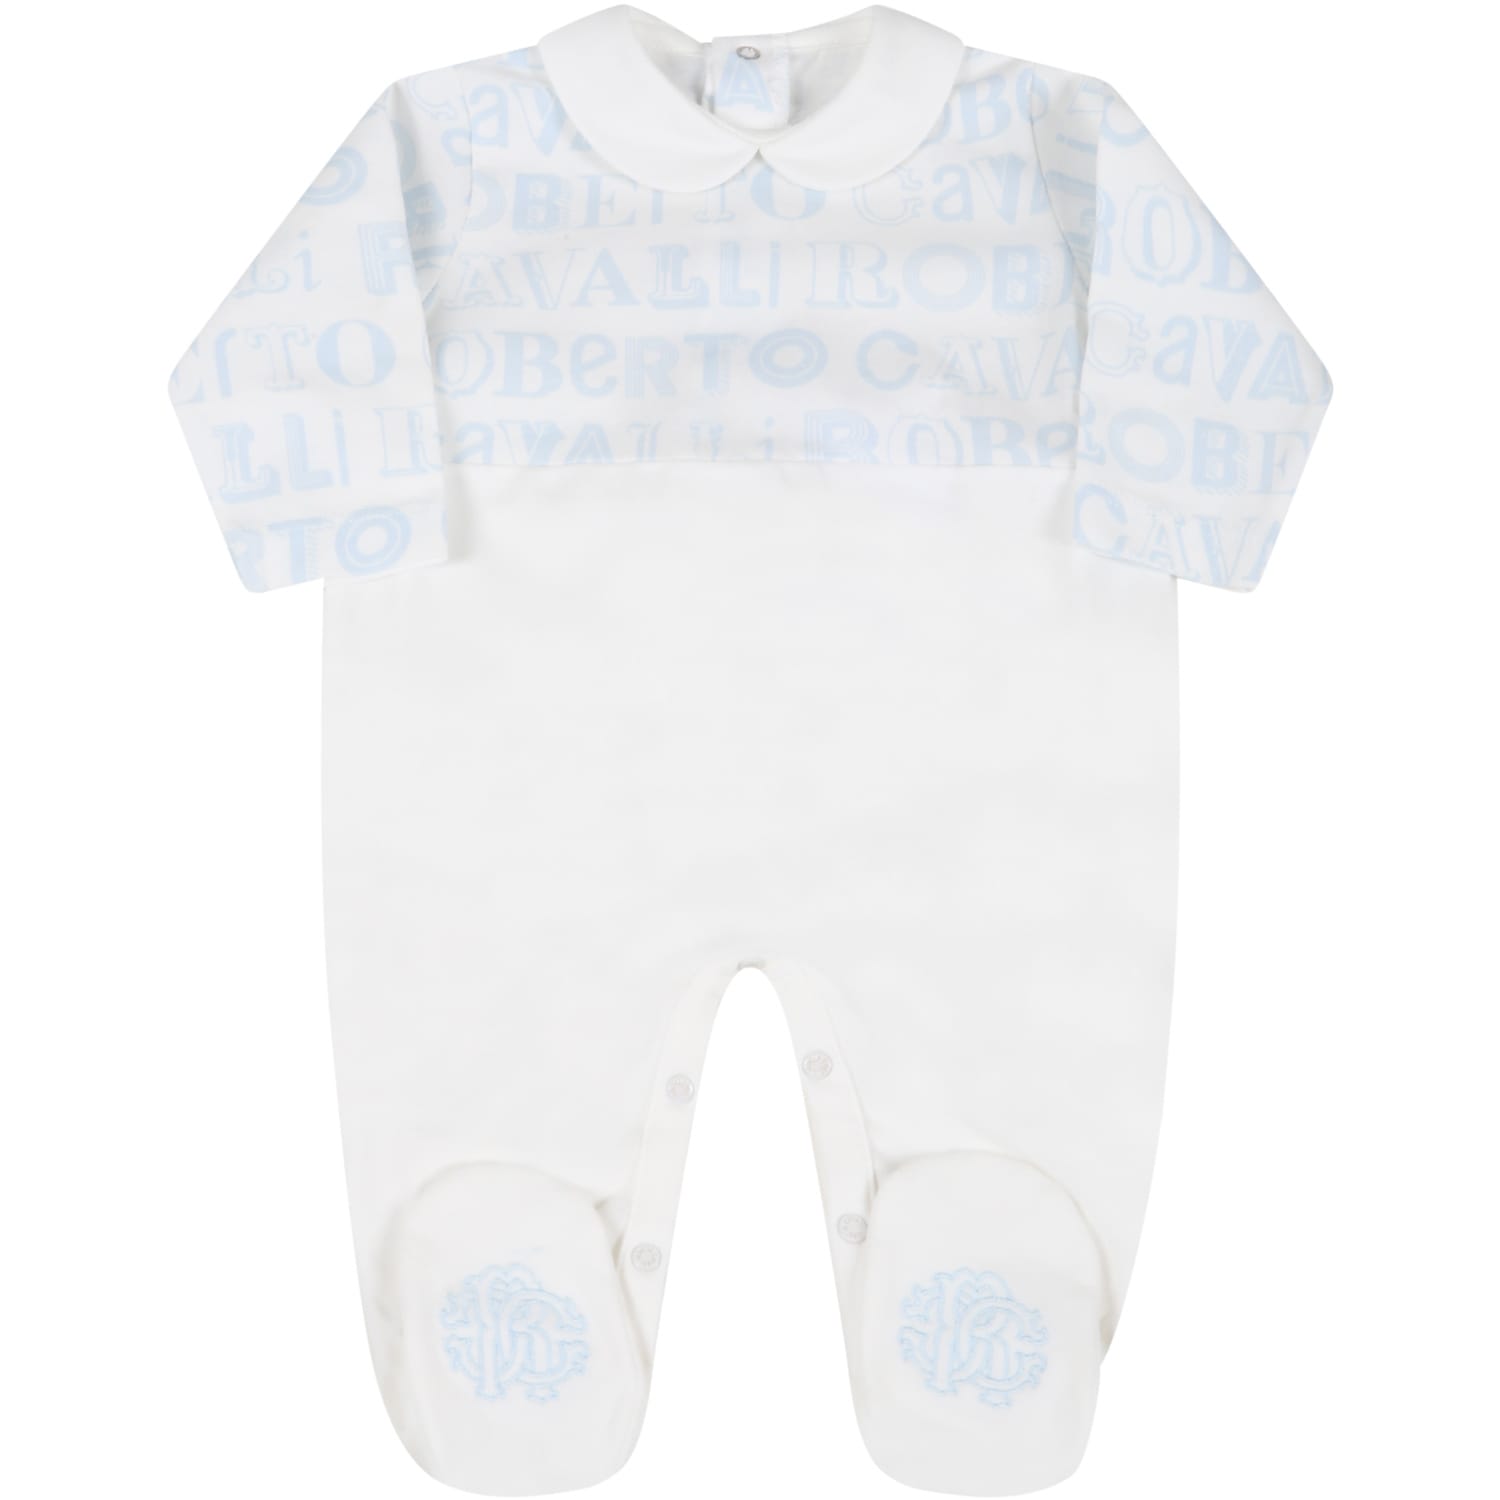 Roberto Cavalli White Suit For Baby Boy With Logos